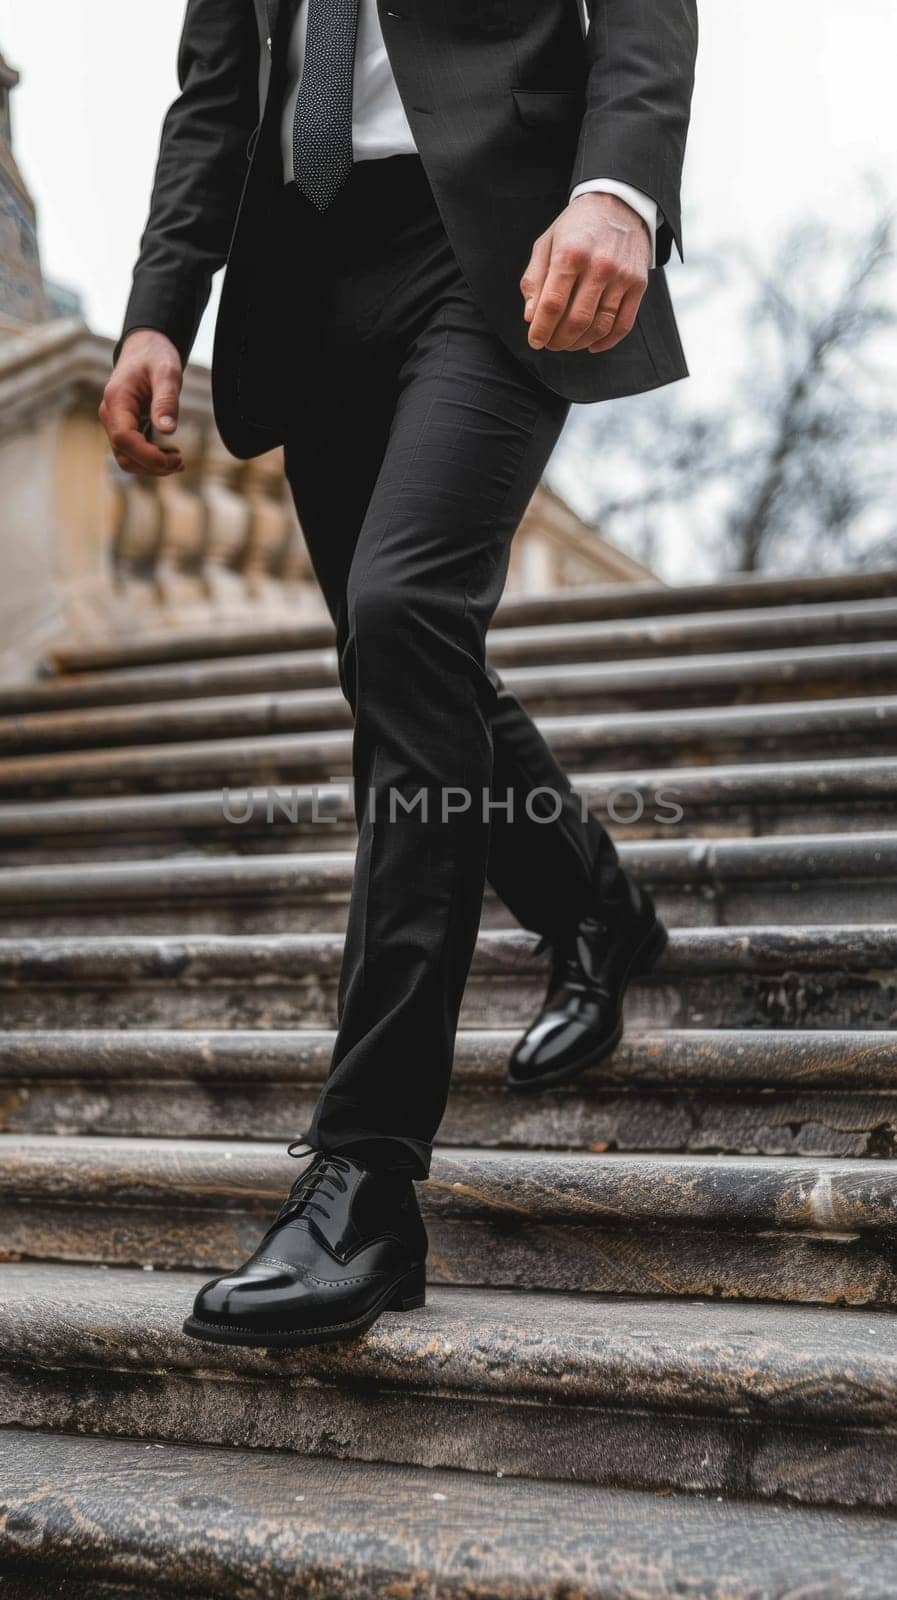 A businessmans foot in a sleek black shoe stepping up marble steps, symbolic of a corporate ascent